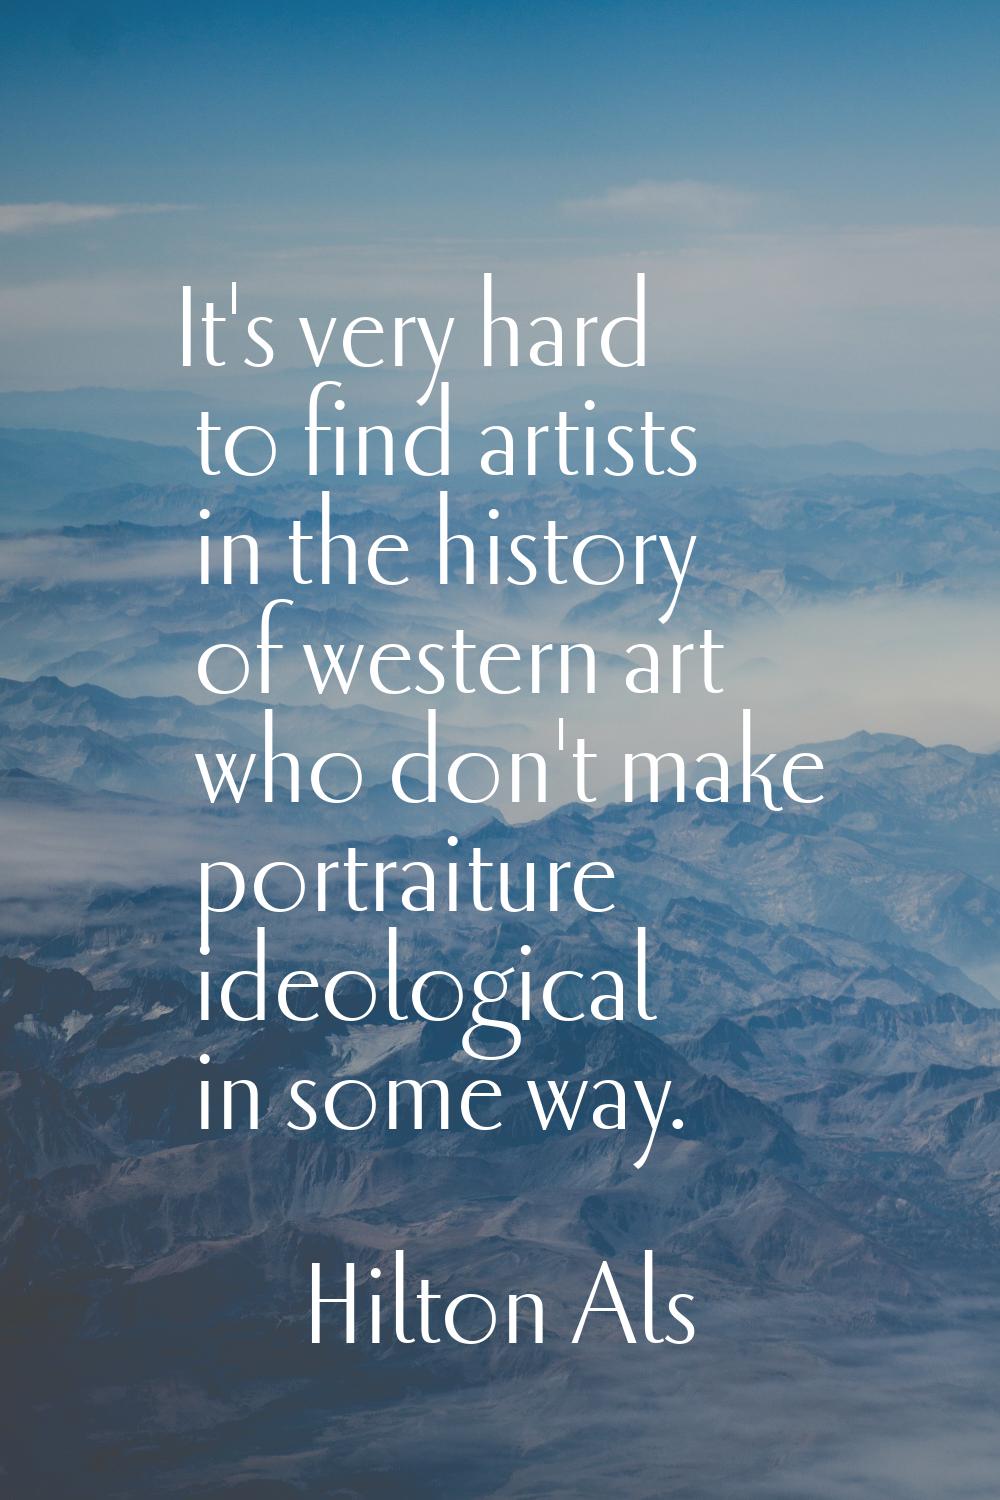 It's very hard to find artists in the history of western art who don't make portraiture ideological